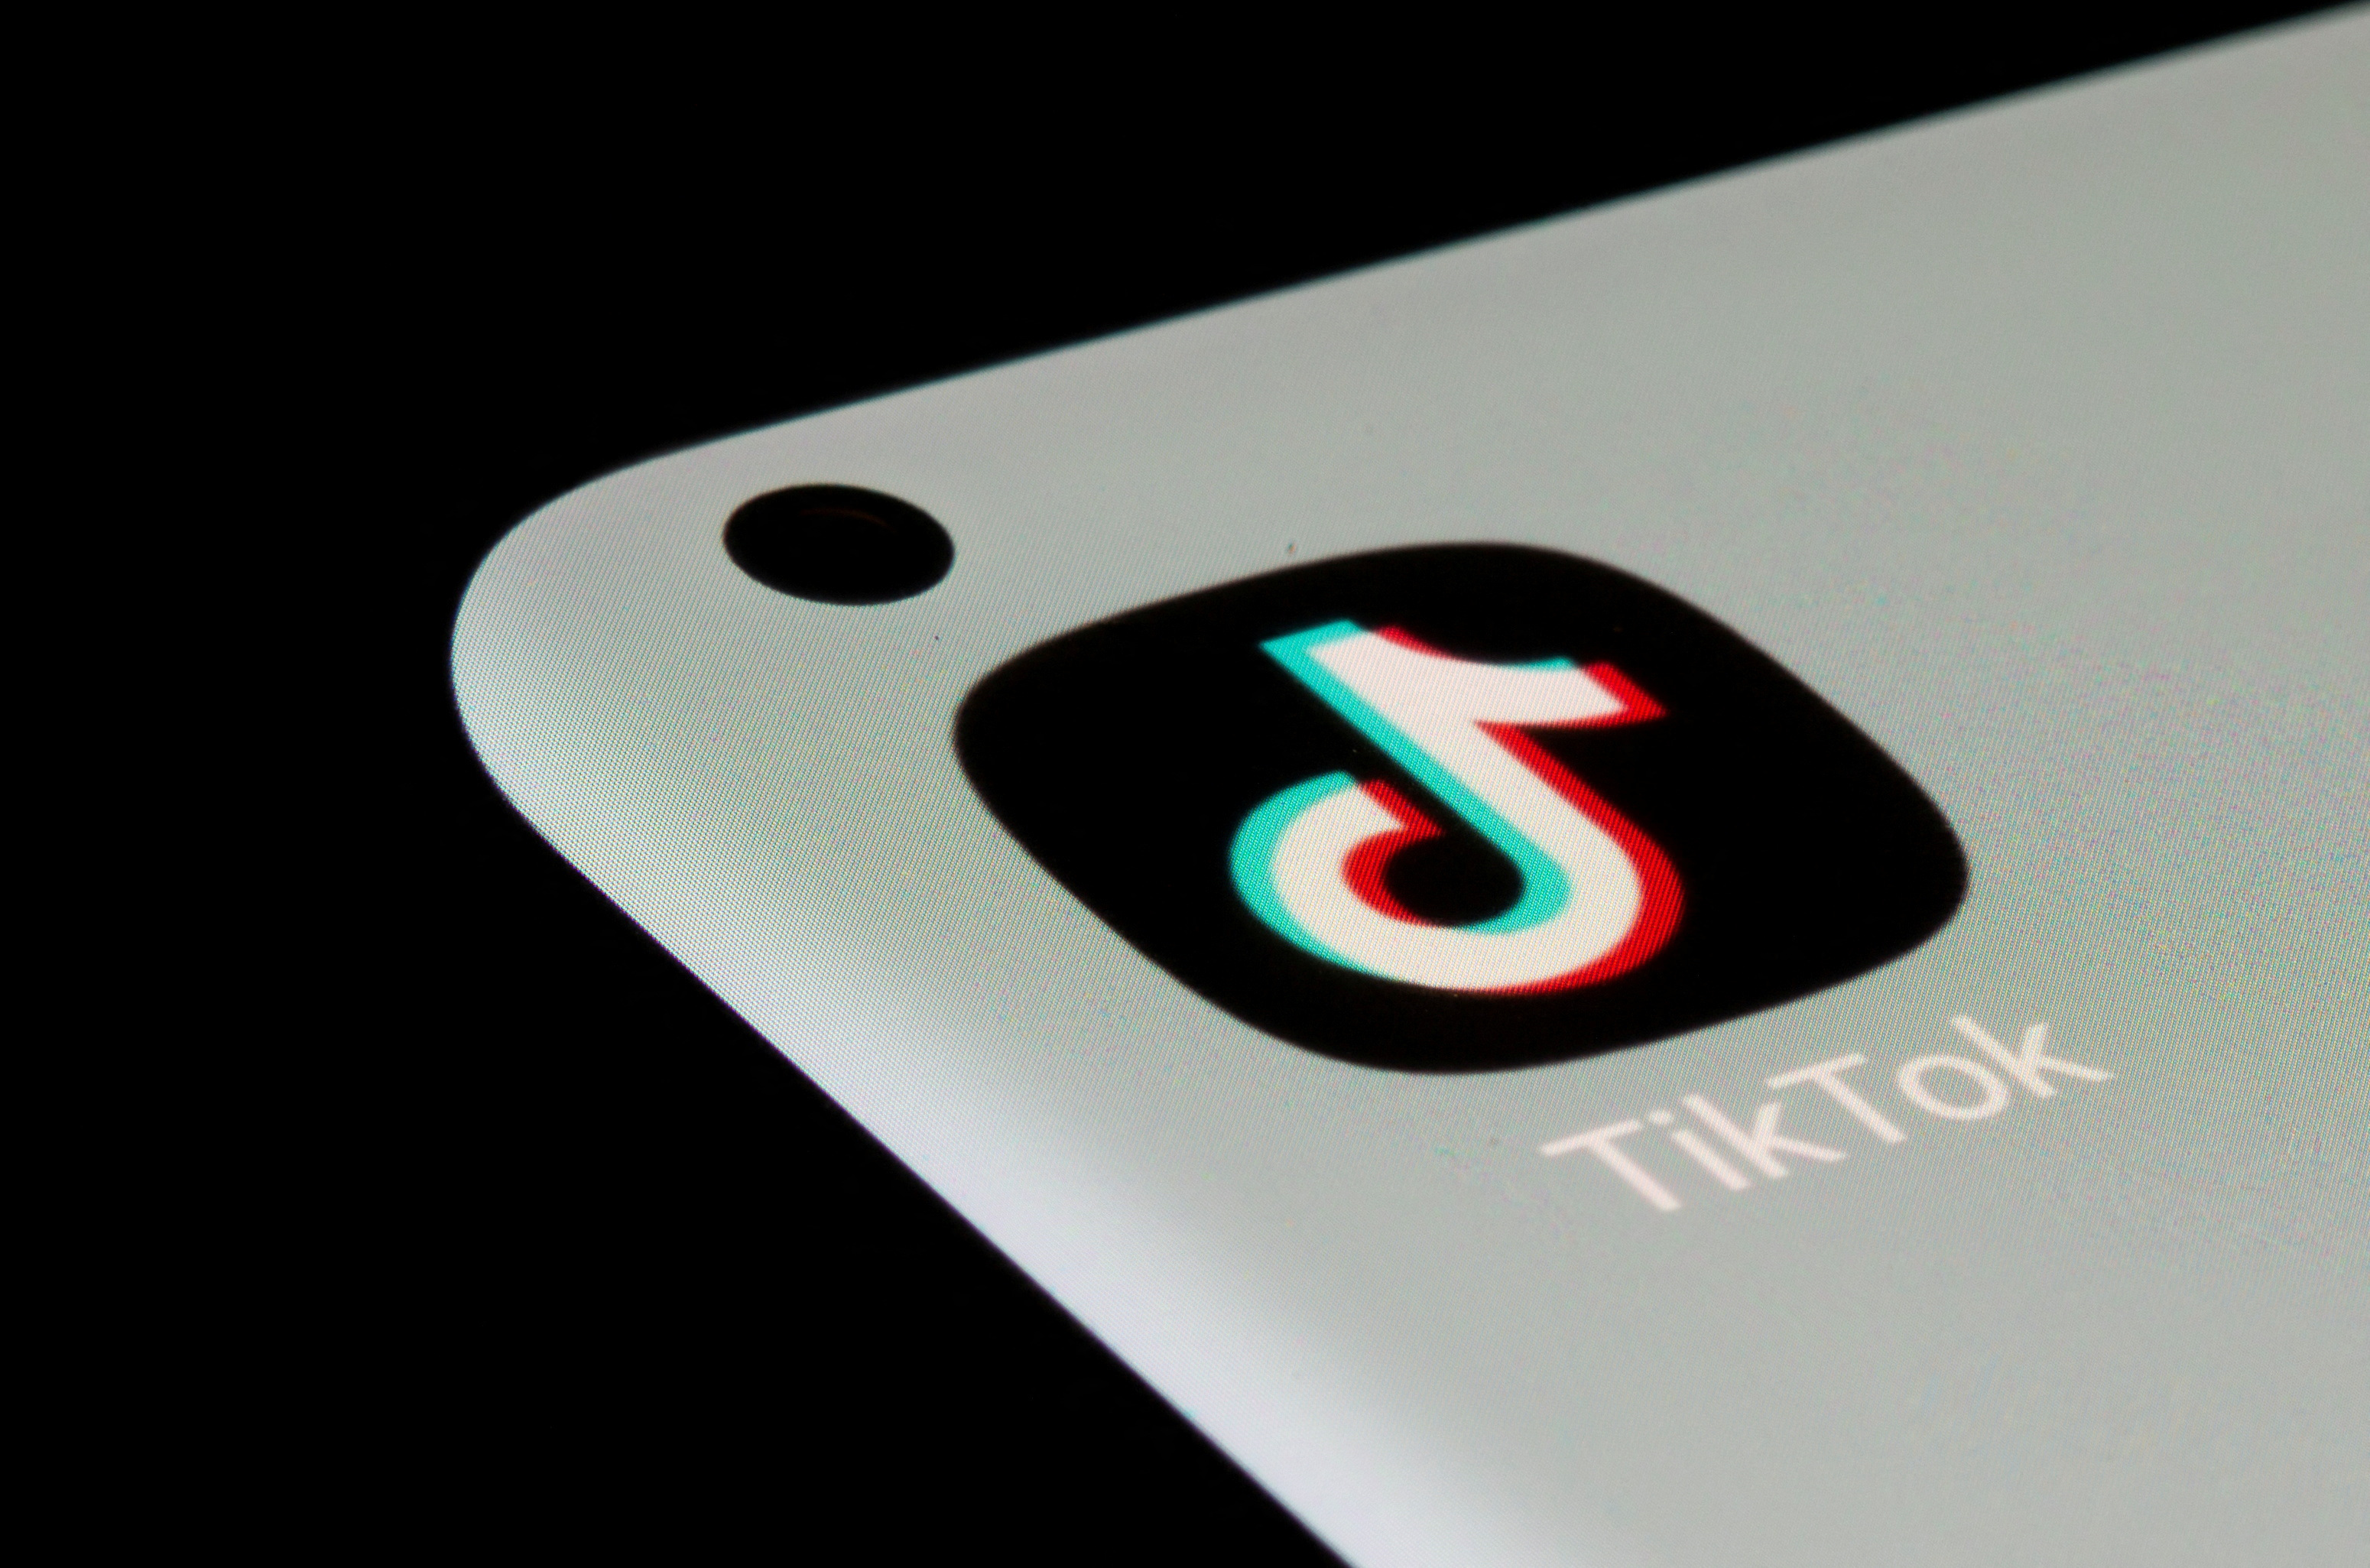 TikTok ban on all Federal devices and systems